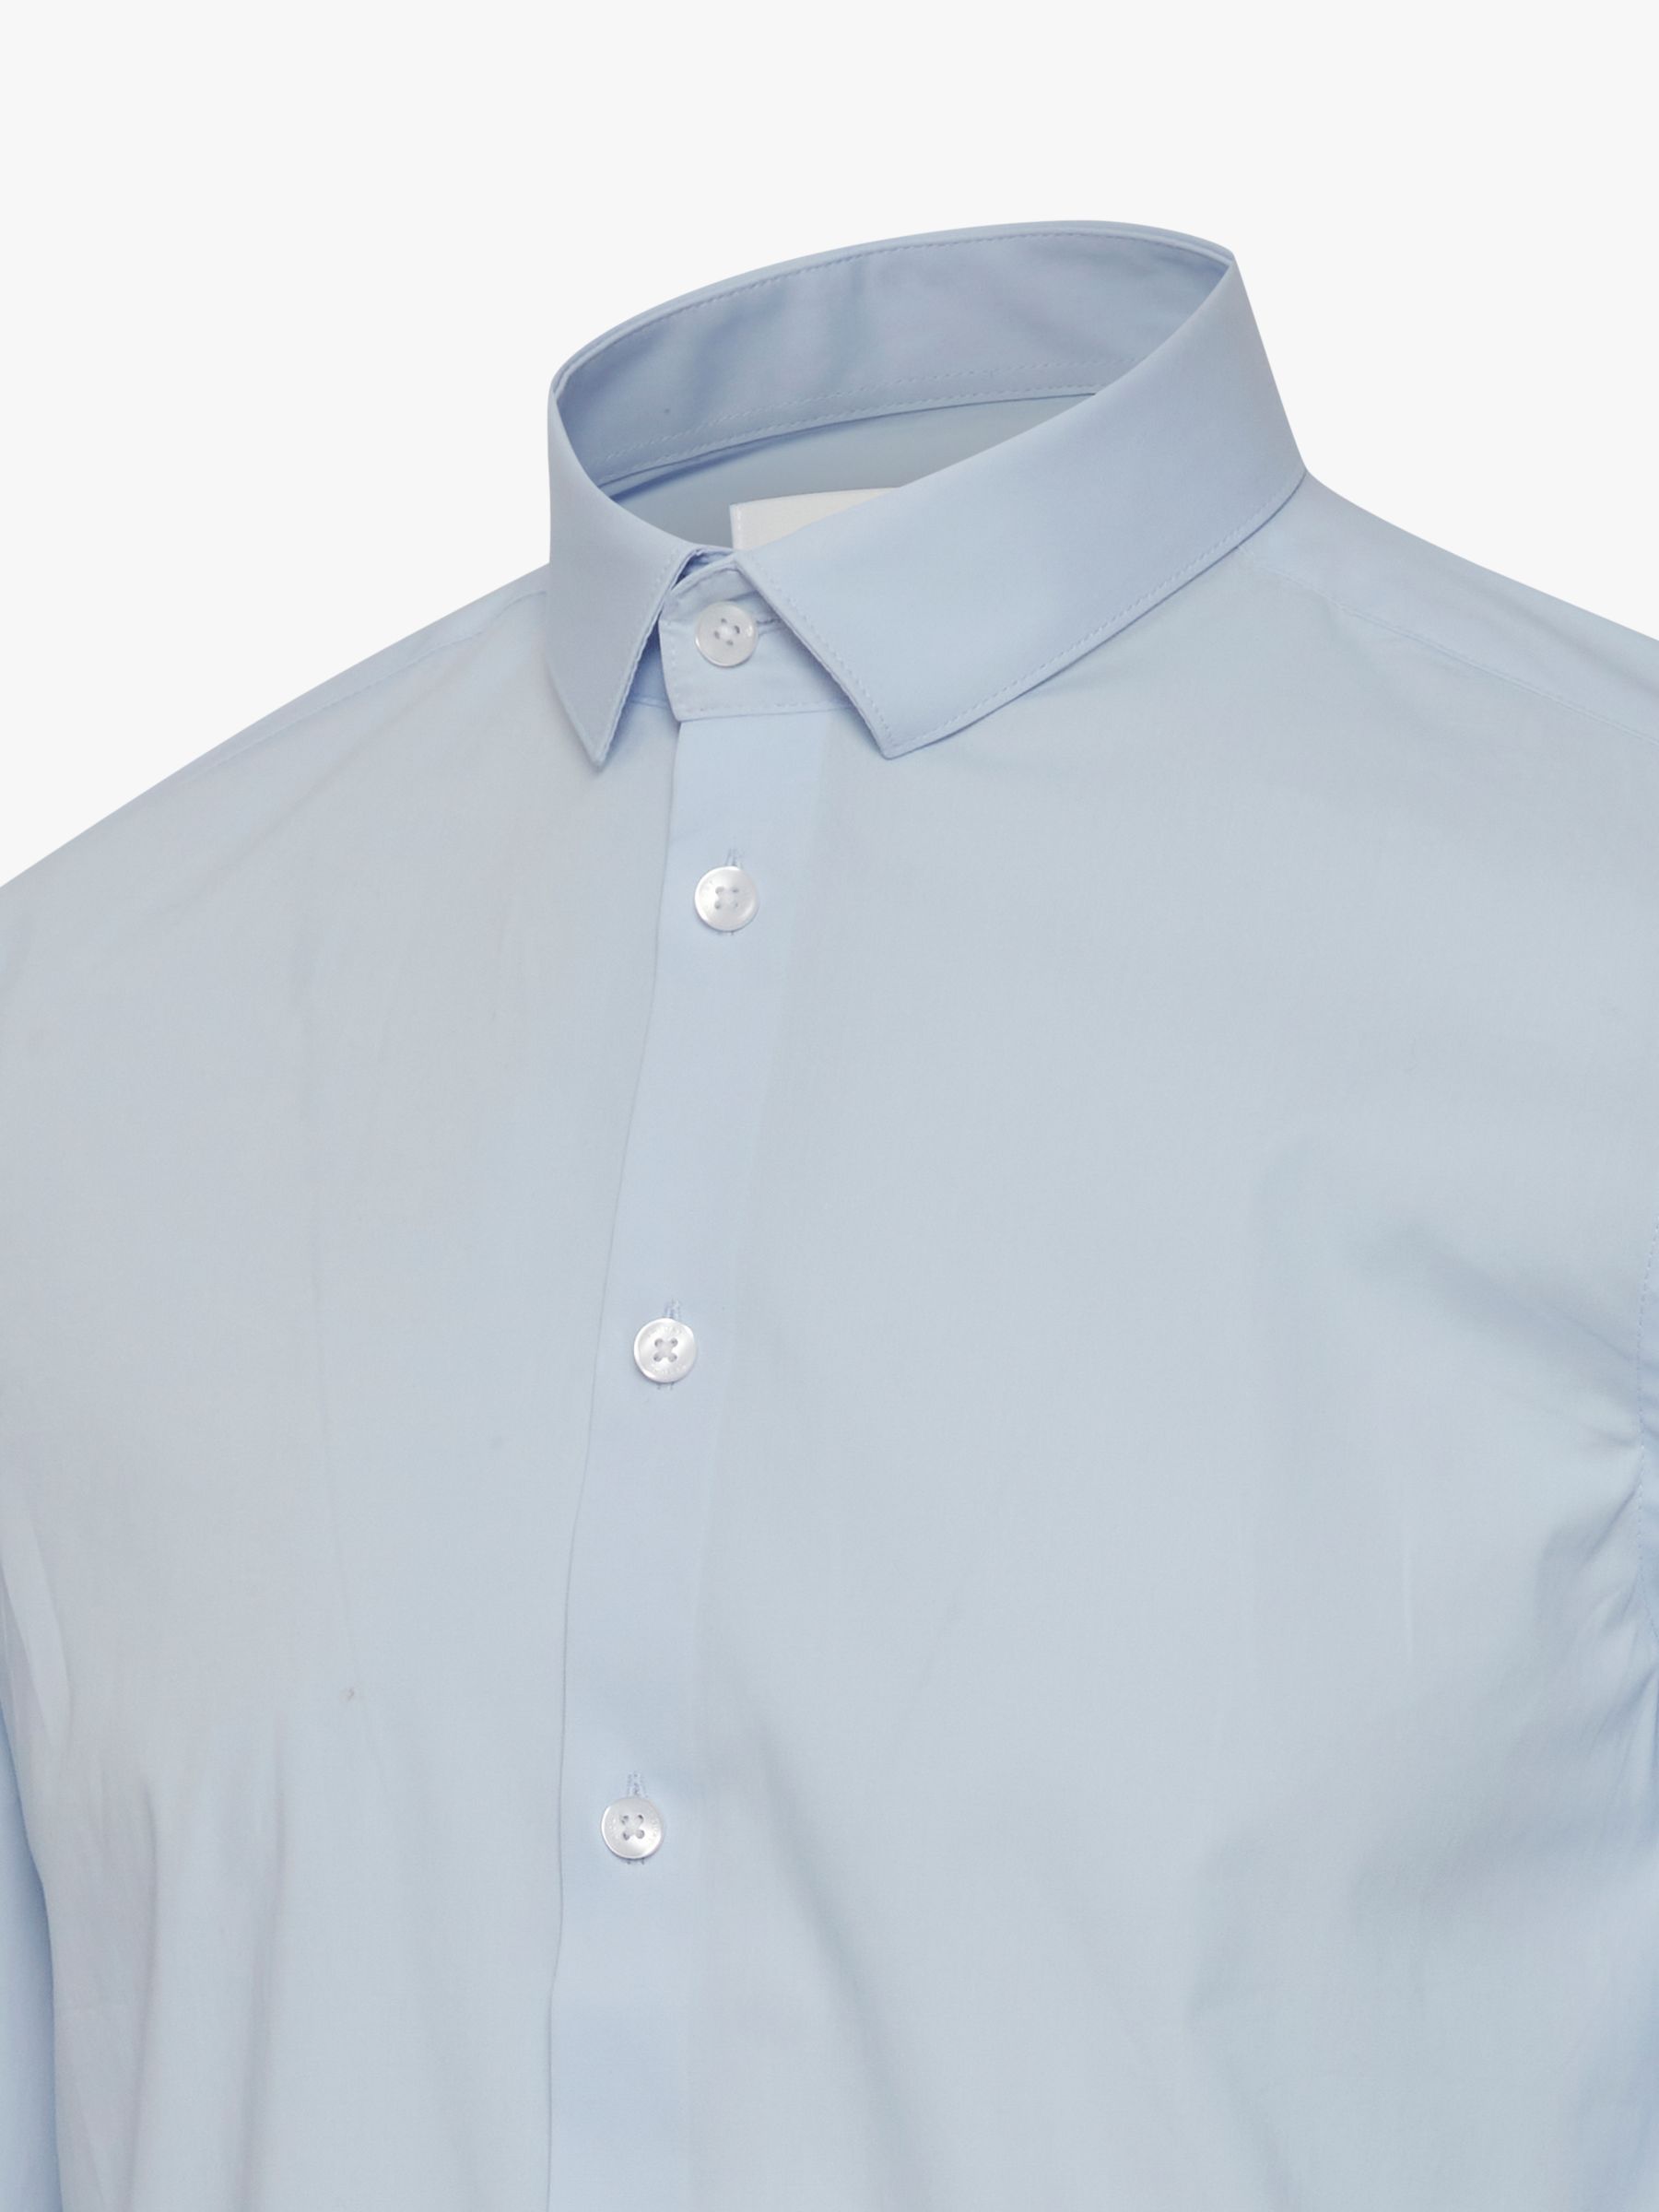 Buy Casual Friday Palle Slim Fit Stretch Long Sleeve Shirt Online at johnlewis.com